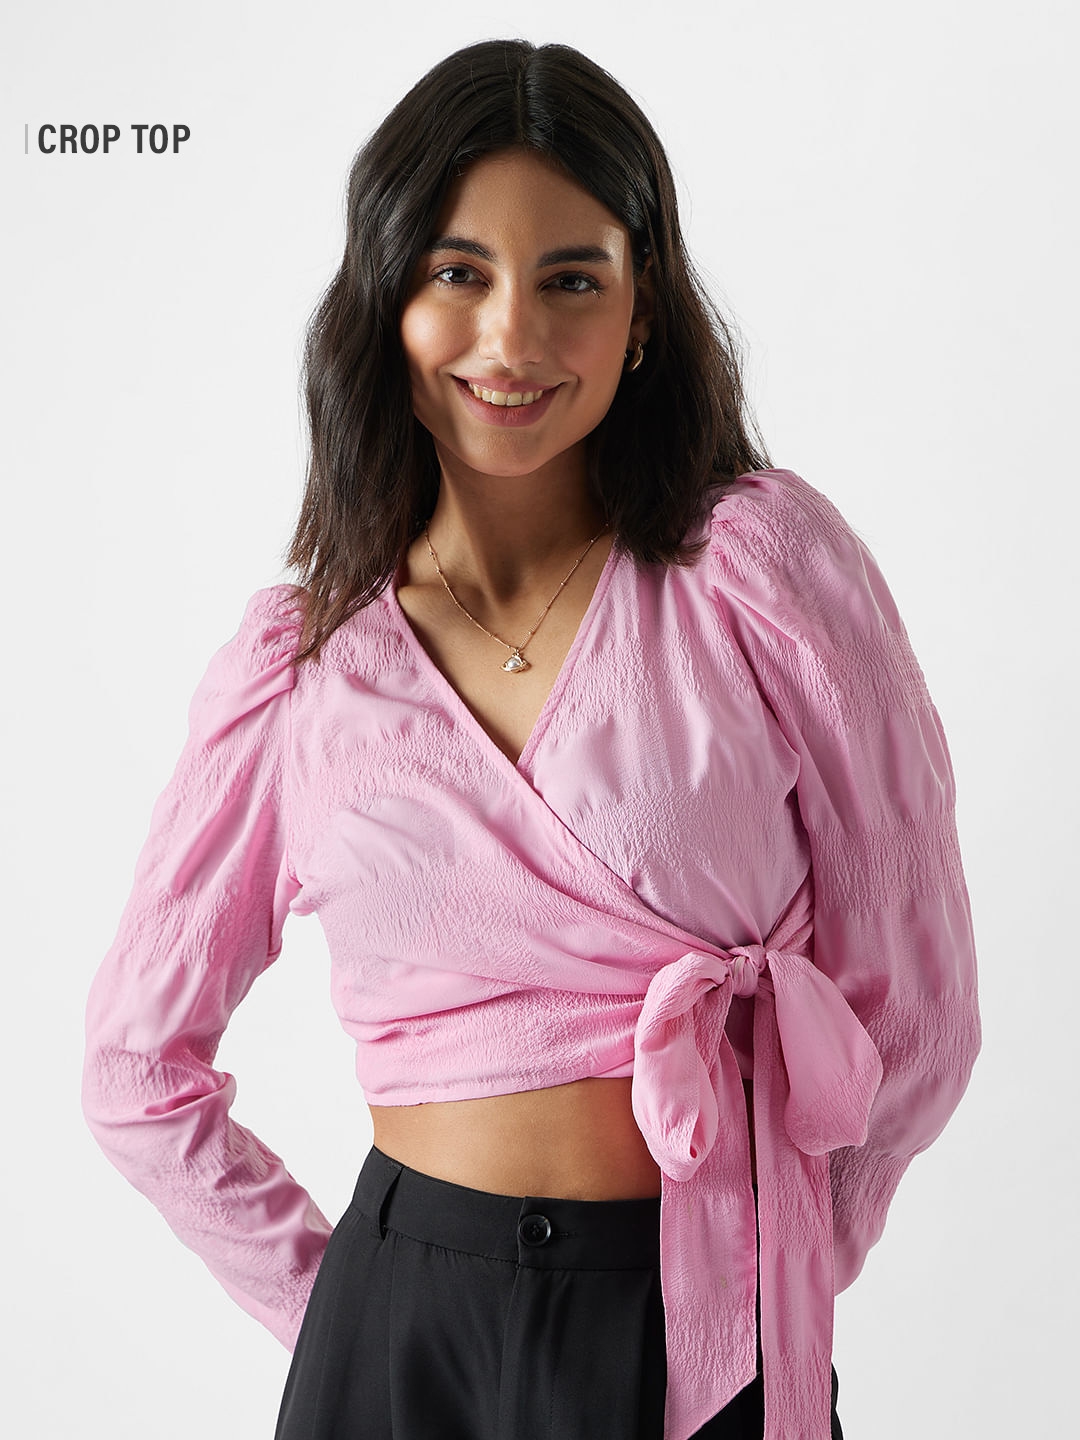 The Souled Store | Women's Solids: Pink Women's Cropped Tops